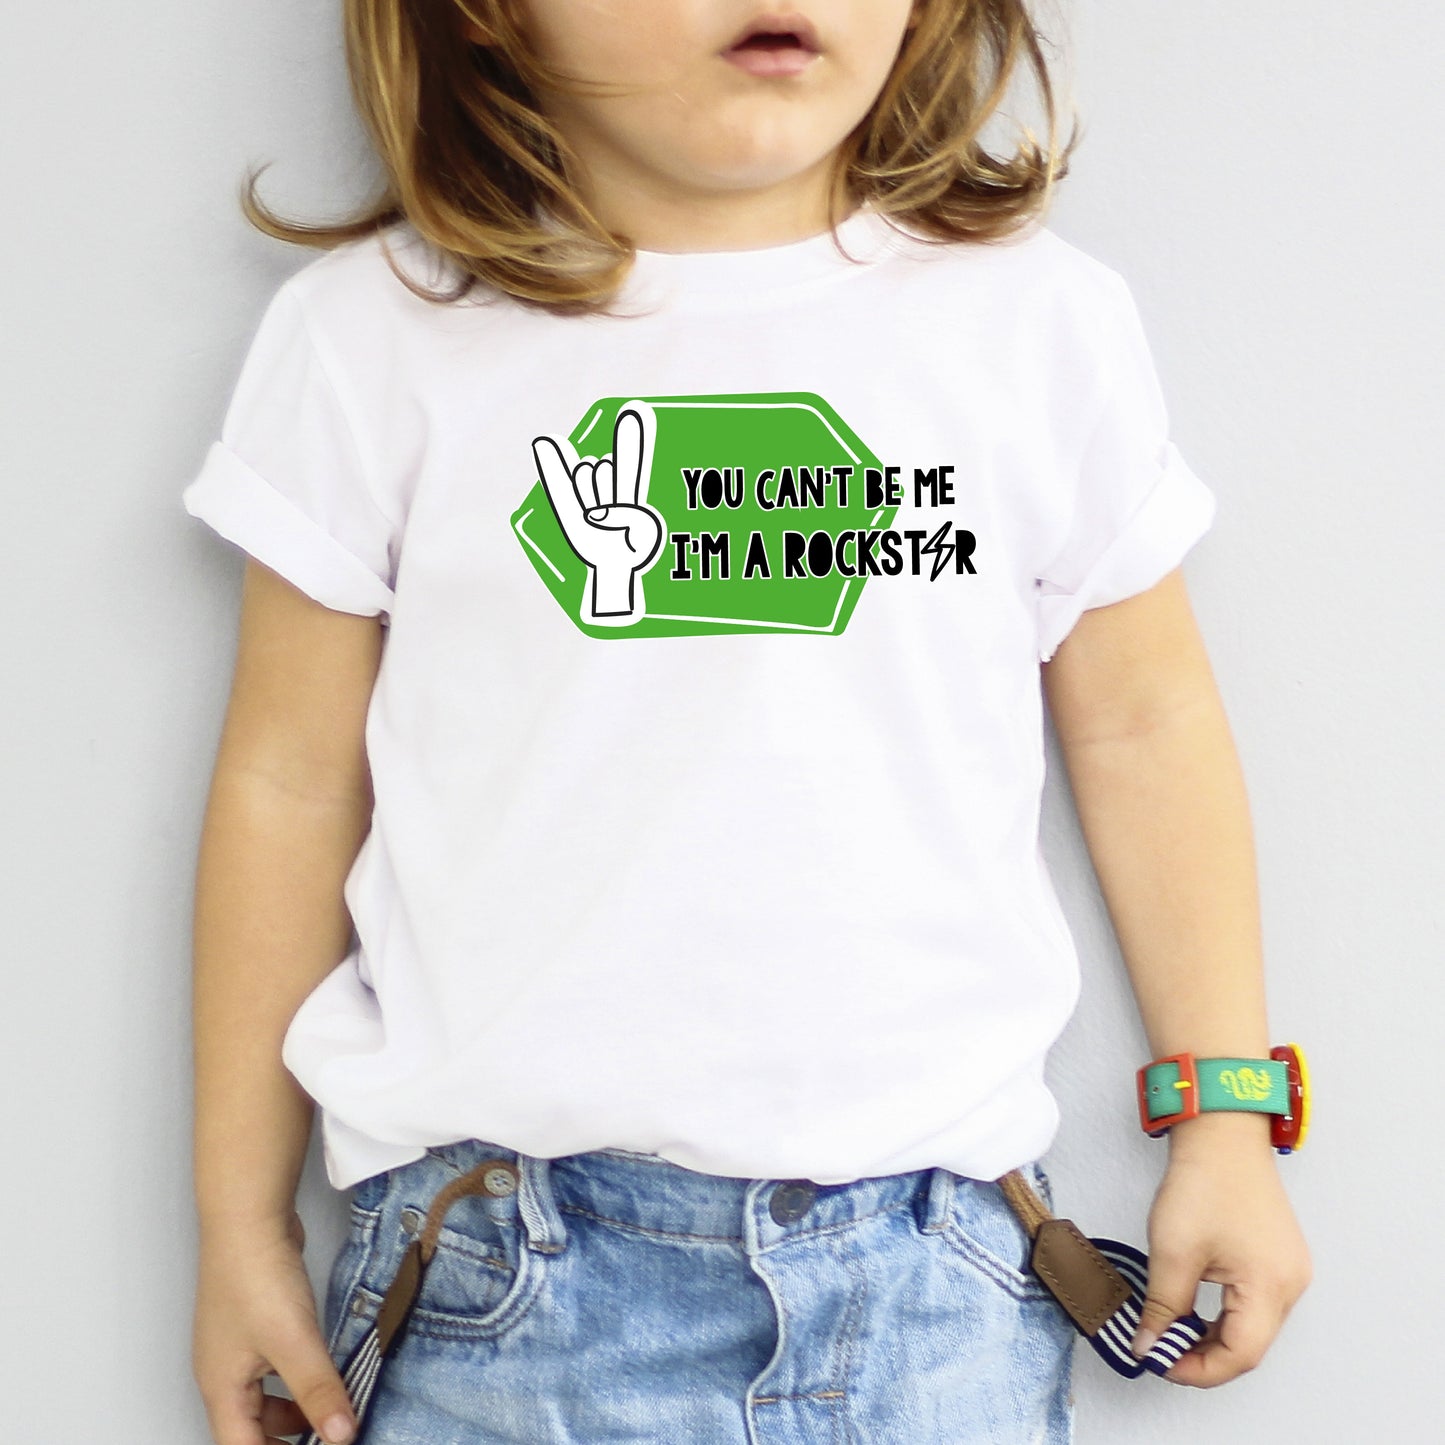 You Can't Be Me - Kids T-shirt